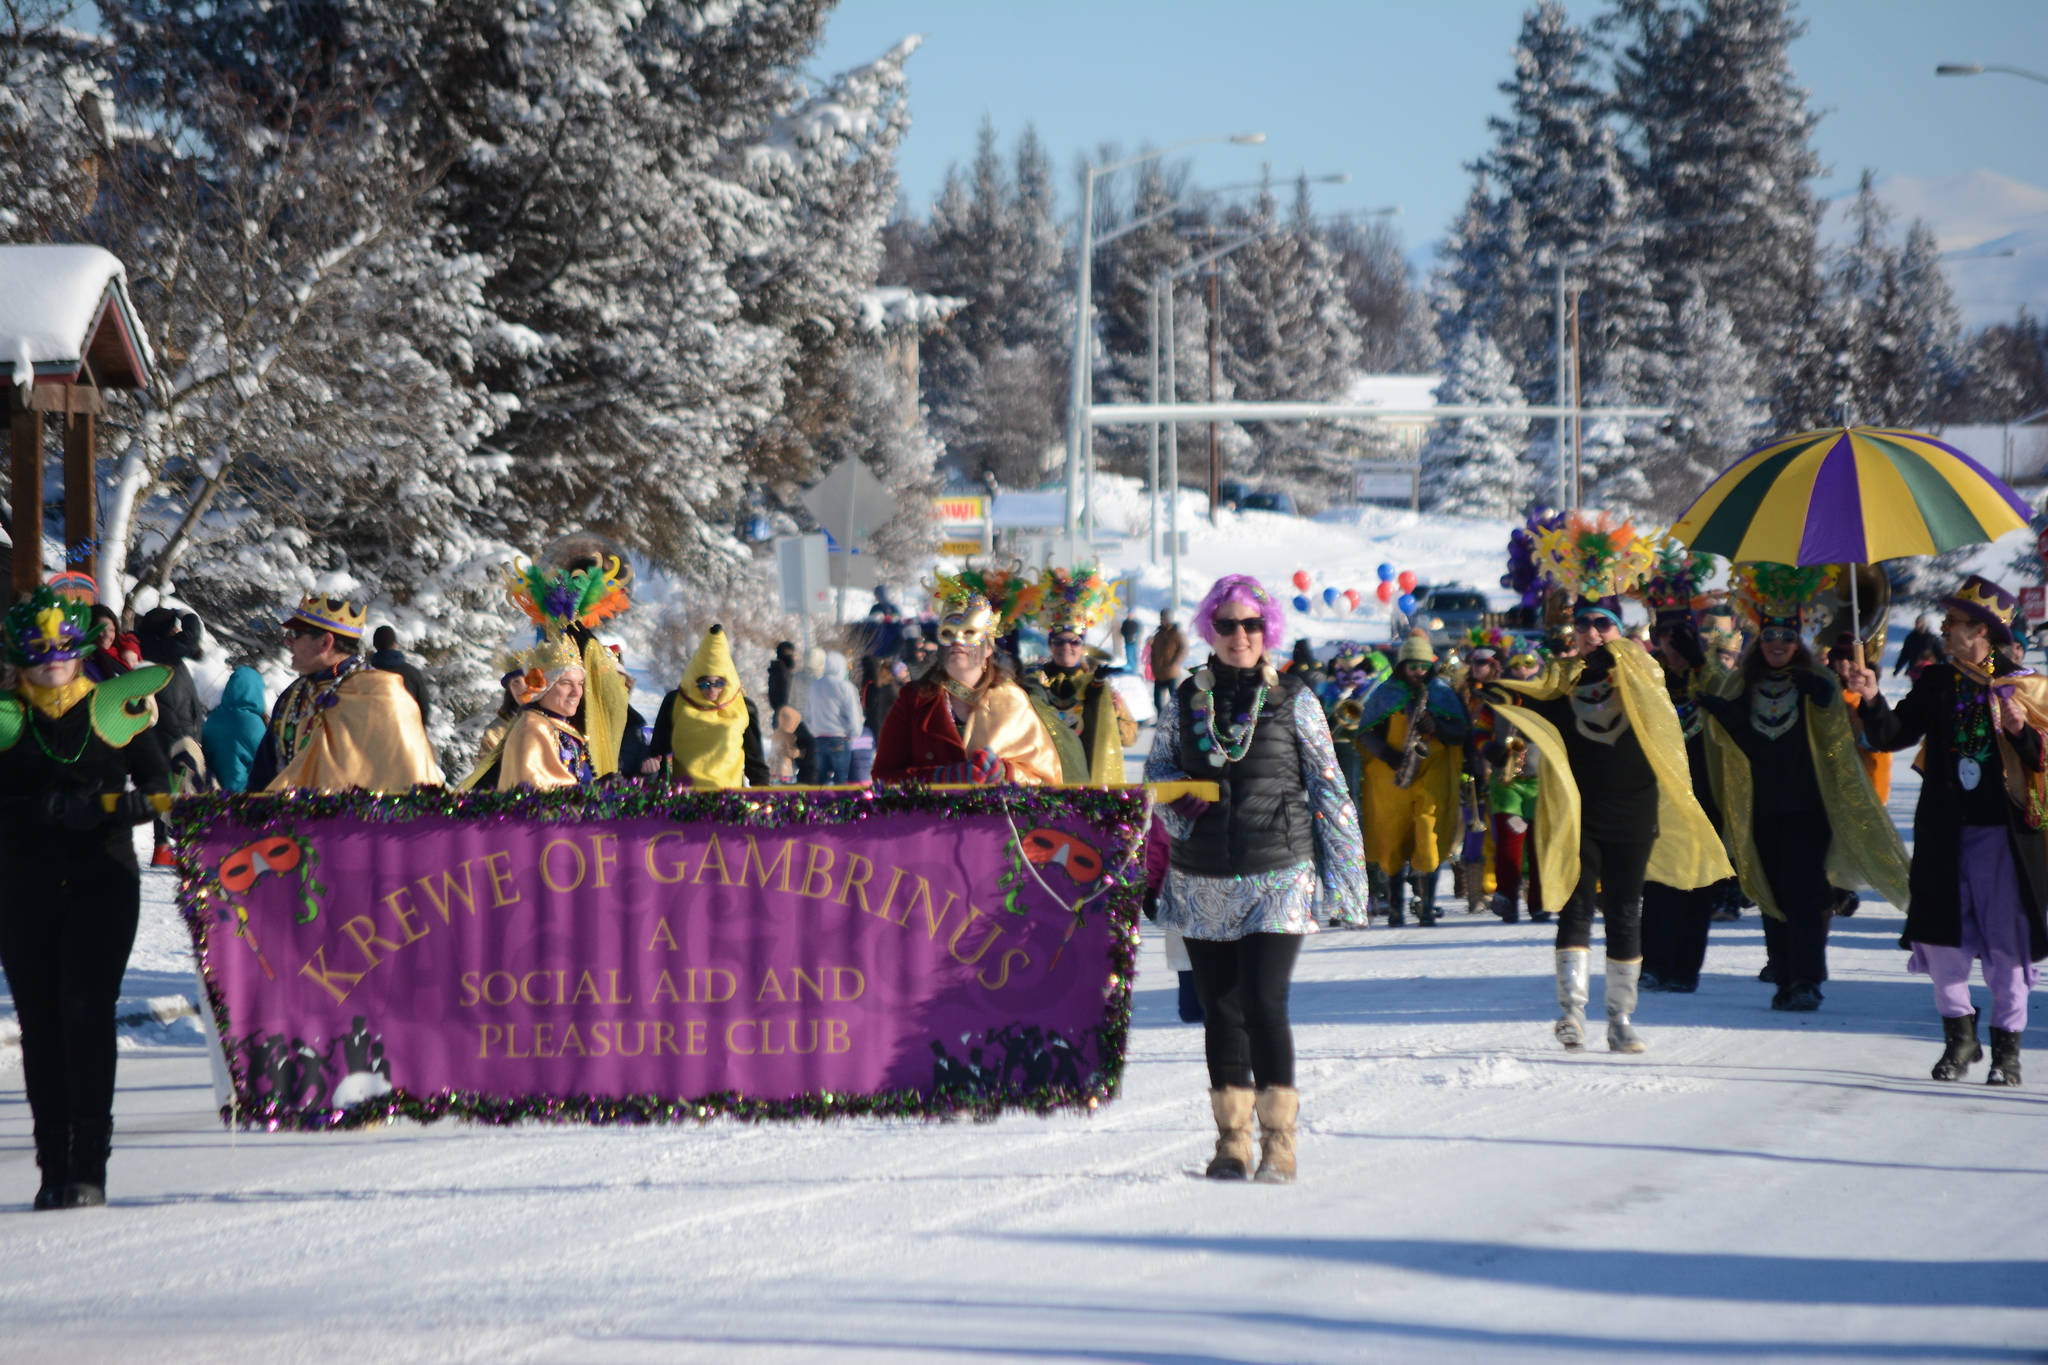 The Krewe of Gambrinus marches in the Homer Winter Carnival parade on Saturday. They won Best of Show in the parade contest. (Photo by Michael Armstrong, Homer News)